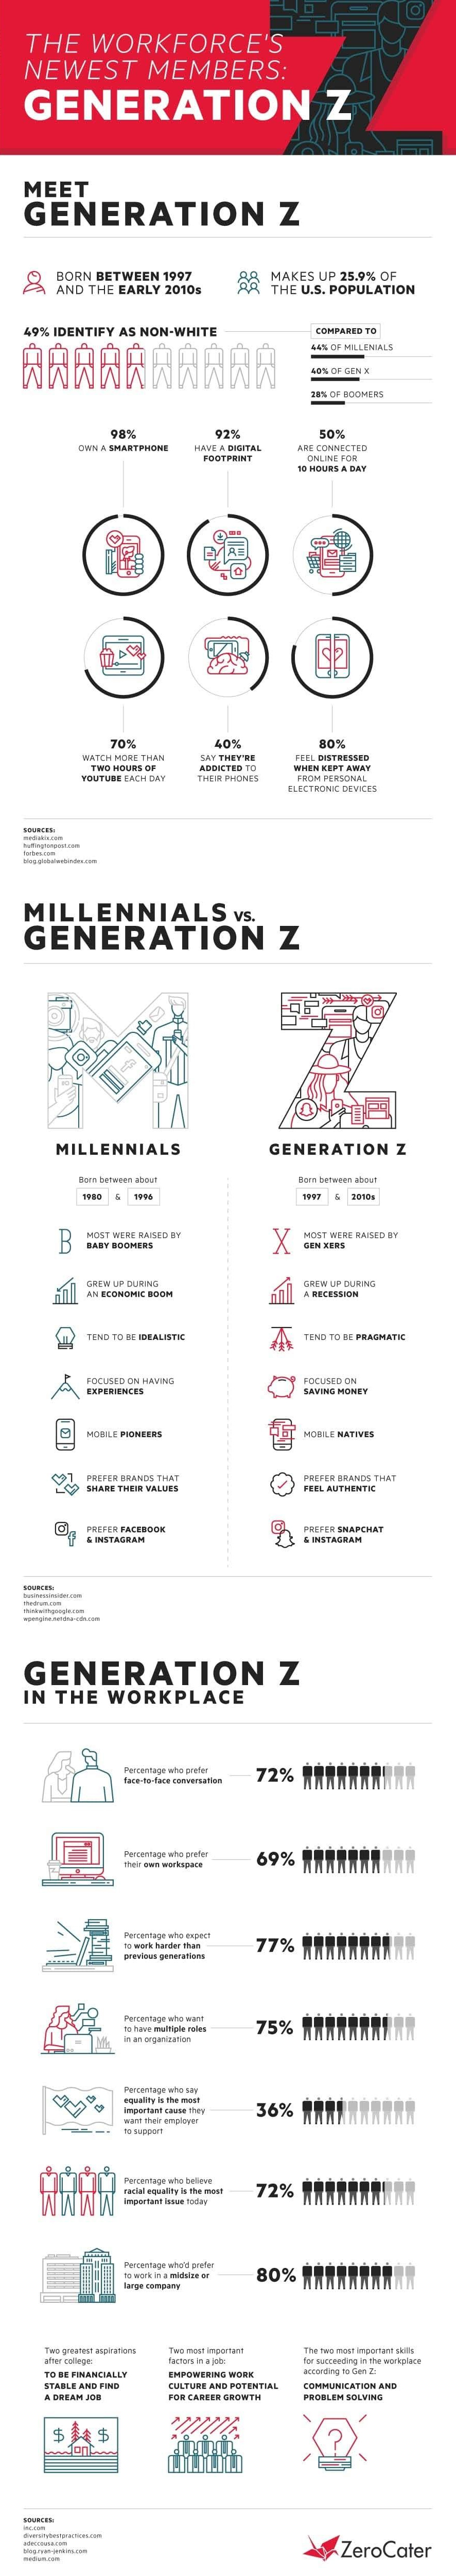 Meet Generation Z: The Newest Member to the Workforce